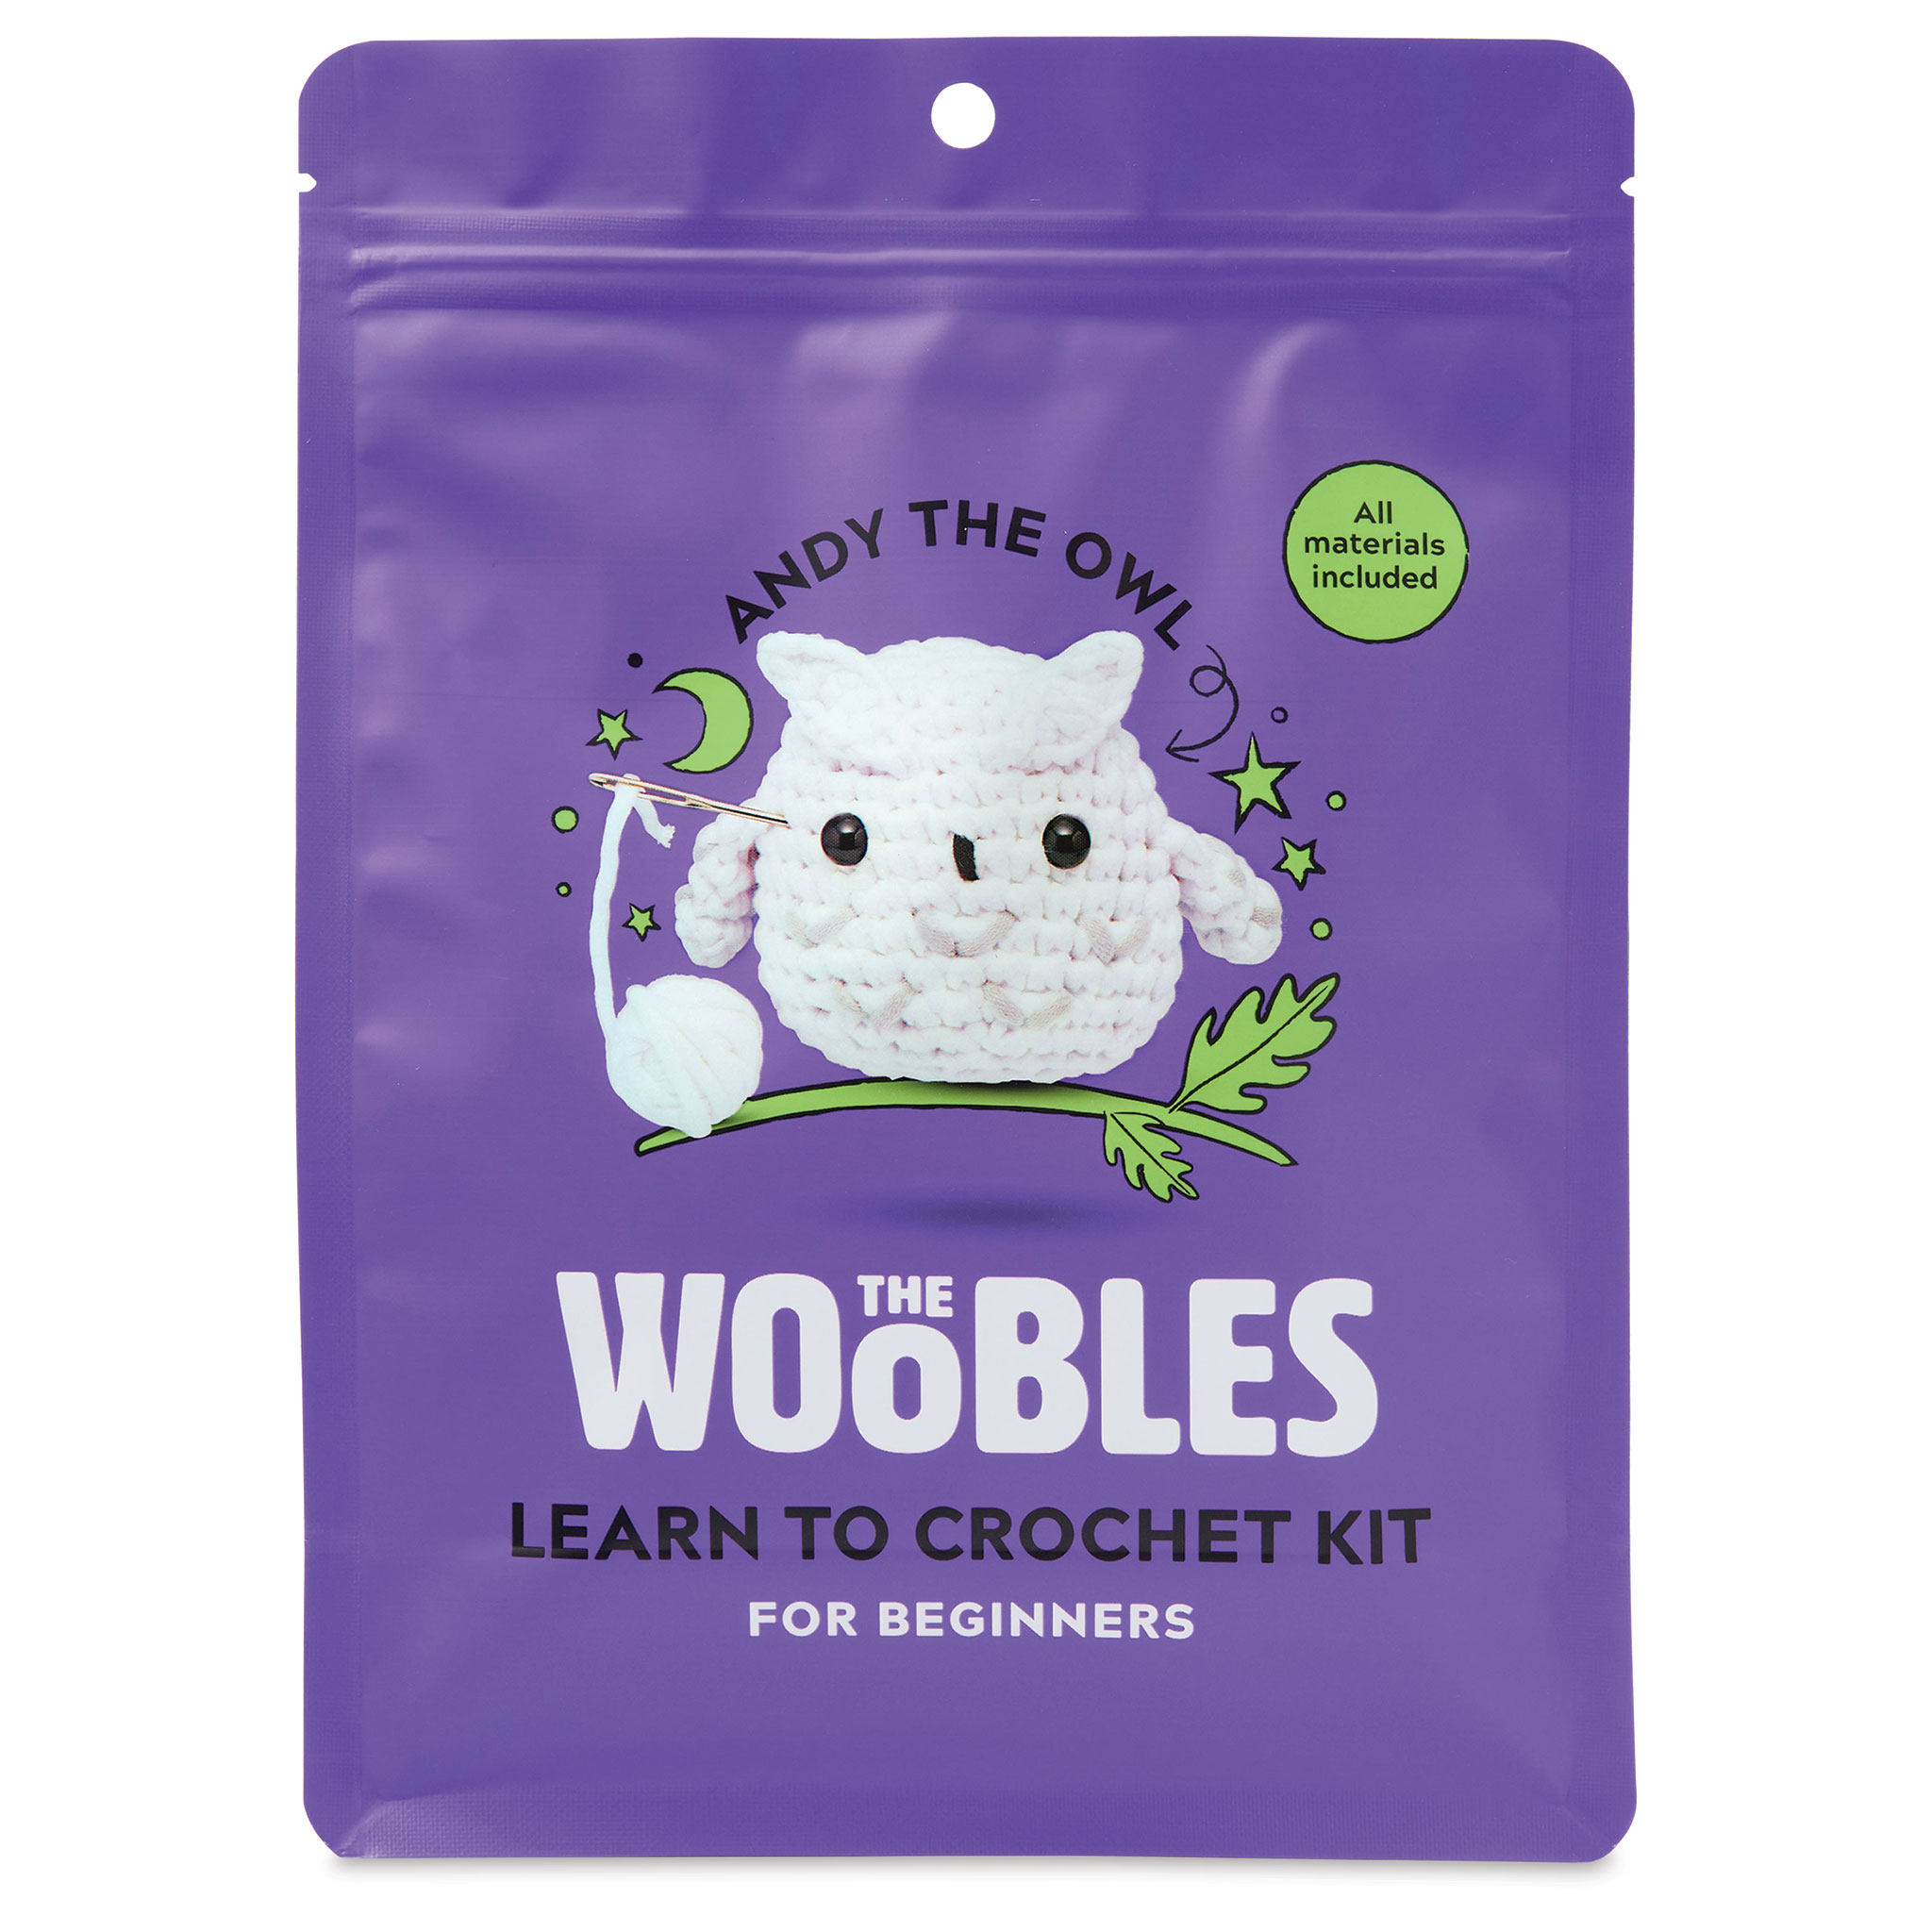 Woobles Reviews 2022: Is This Beginner's Kit for Learning to